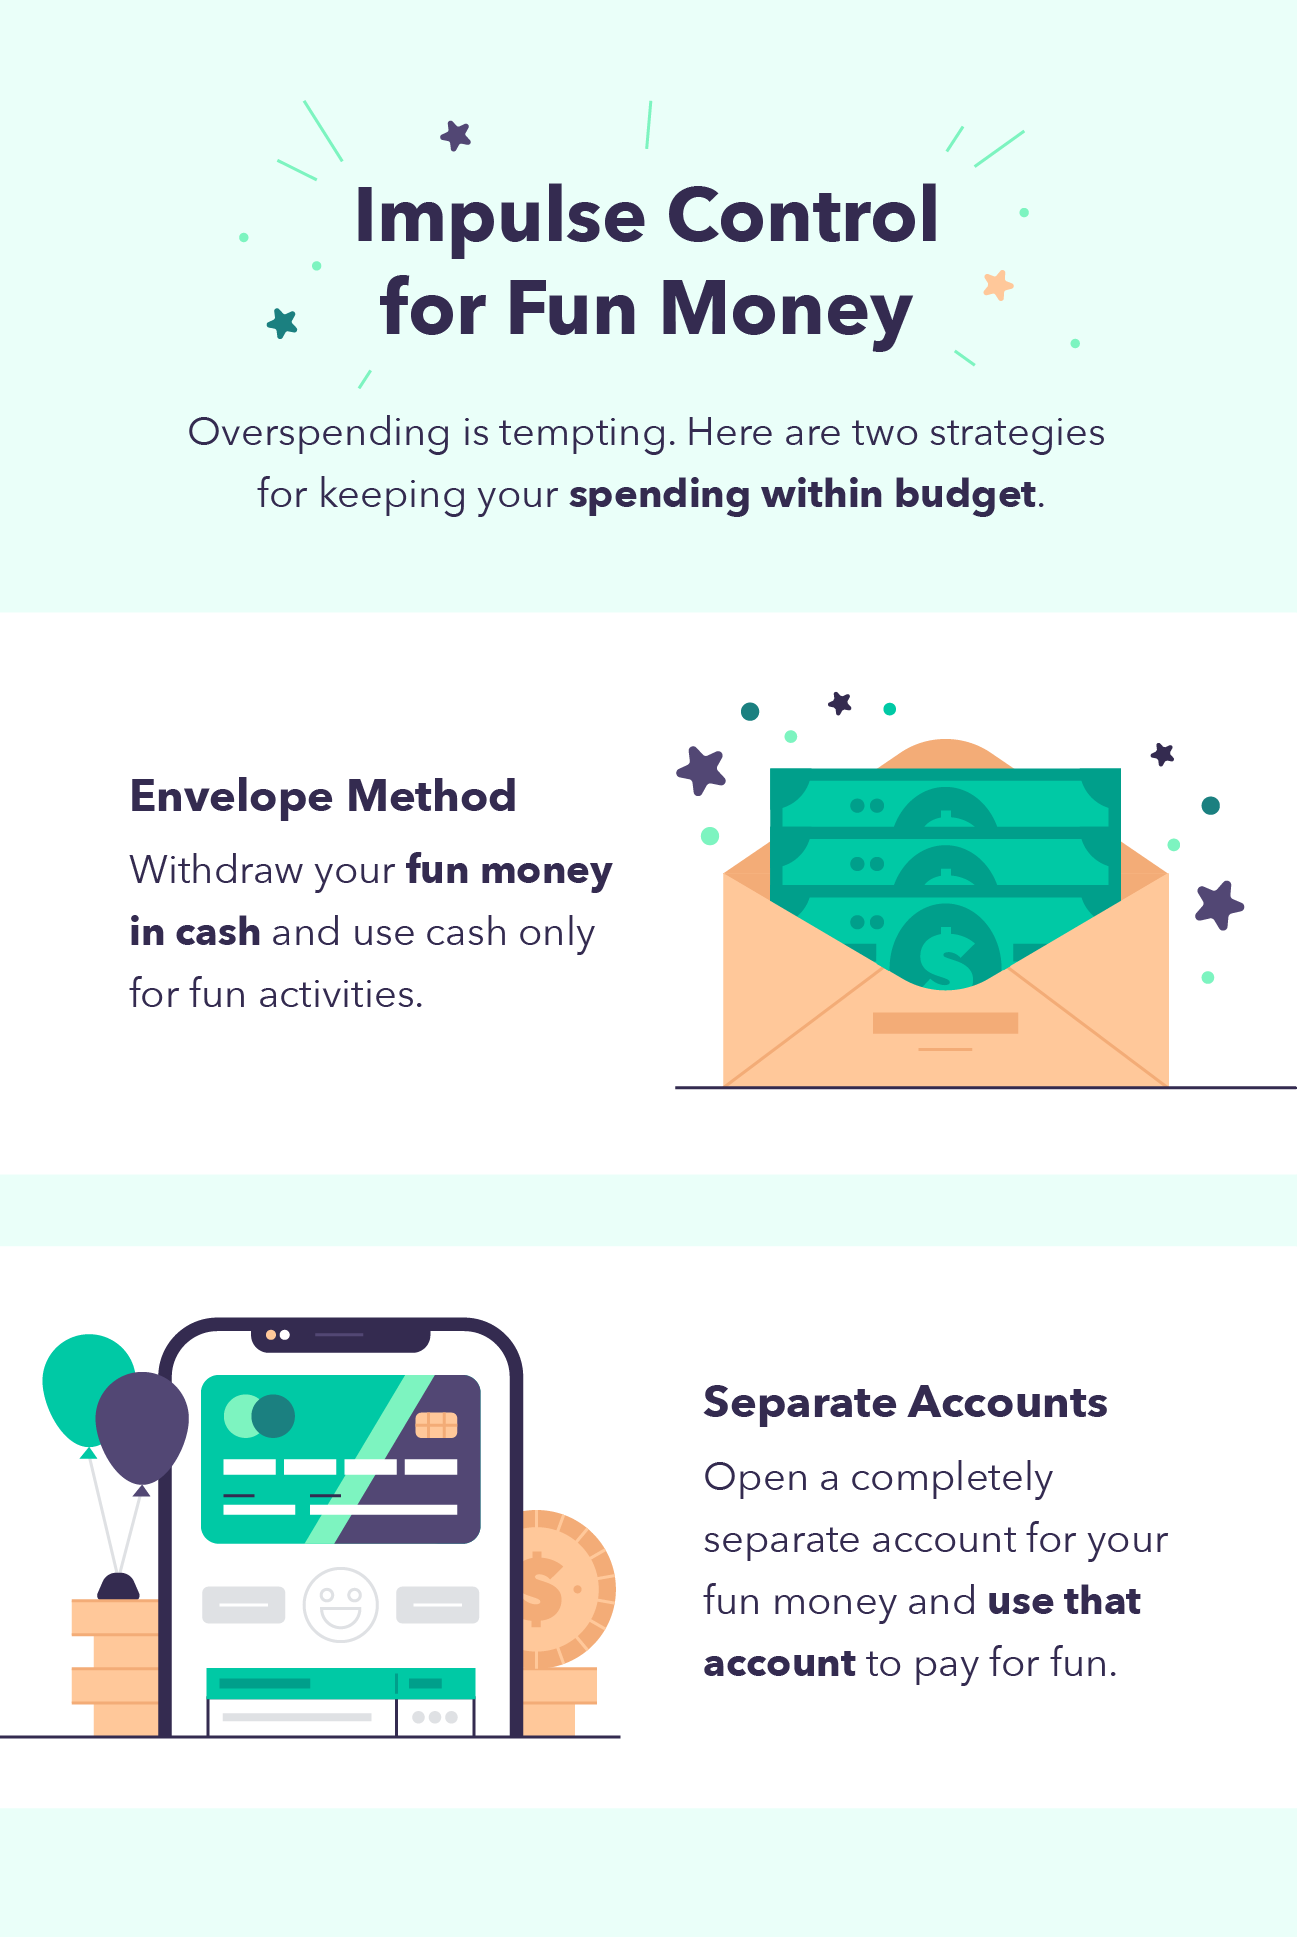 Two illustrations help underscore how using separate bank accounts and the envelope method keep you from overspending your fun money.